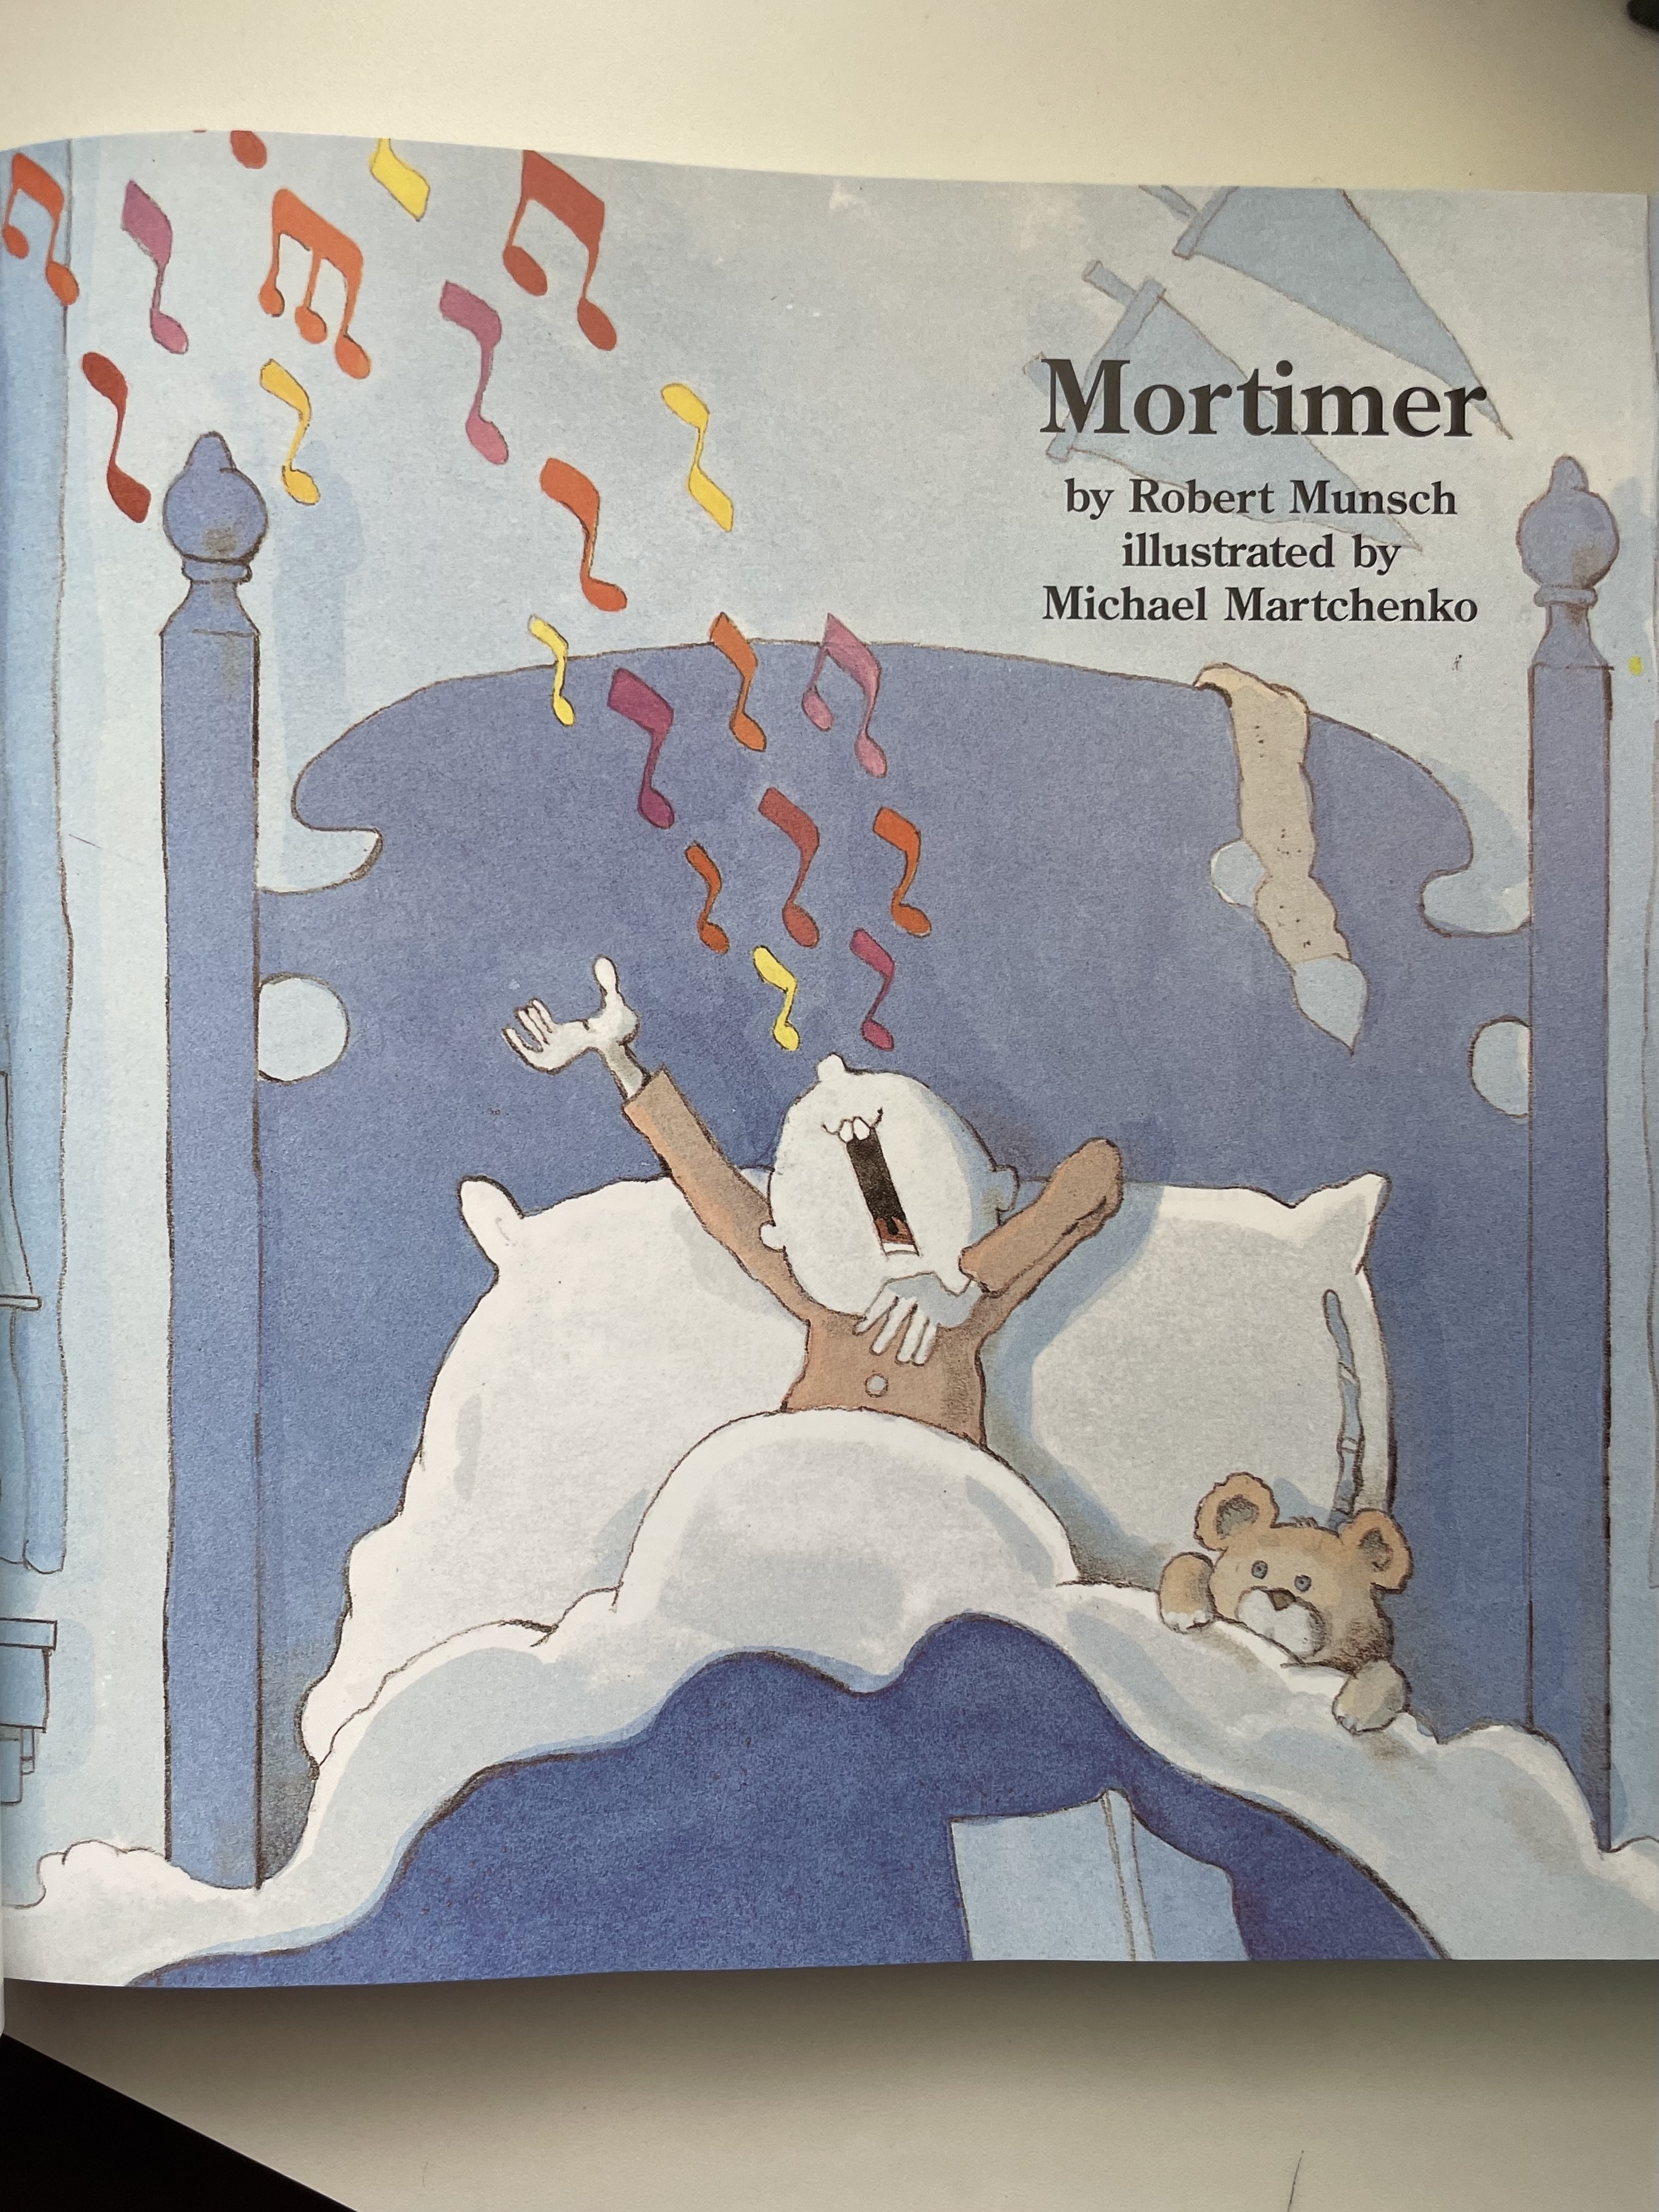 Illustration of a character, Mortimer, with a teddy bear, singing in bed from the book &quot;Mortimer&quot; by Robert Munsch